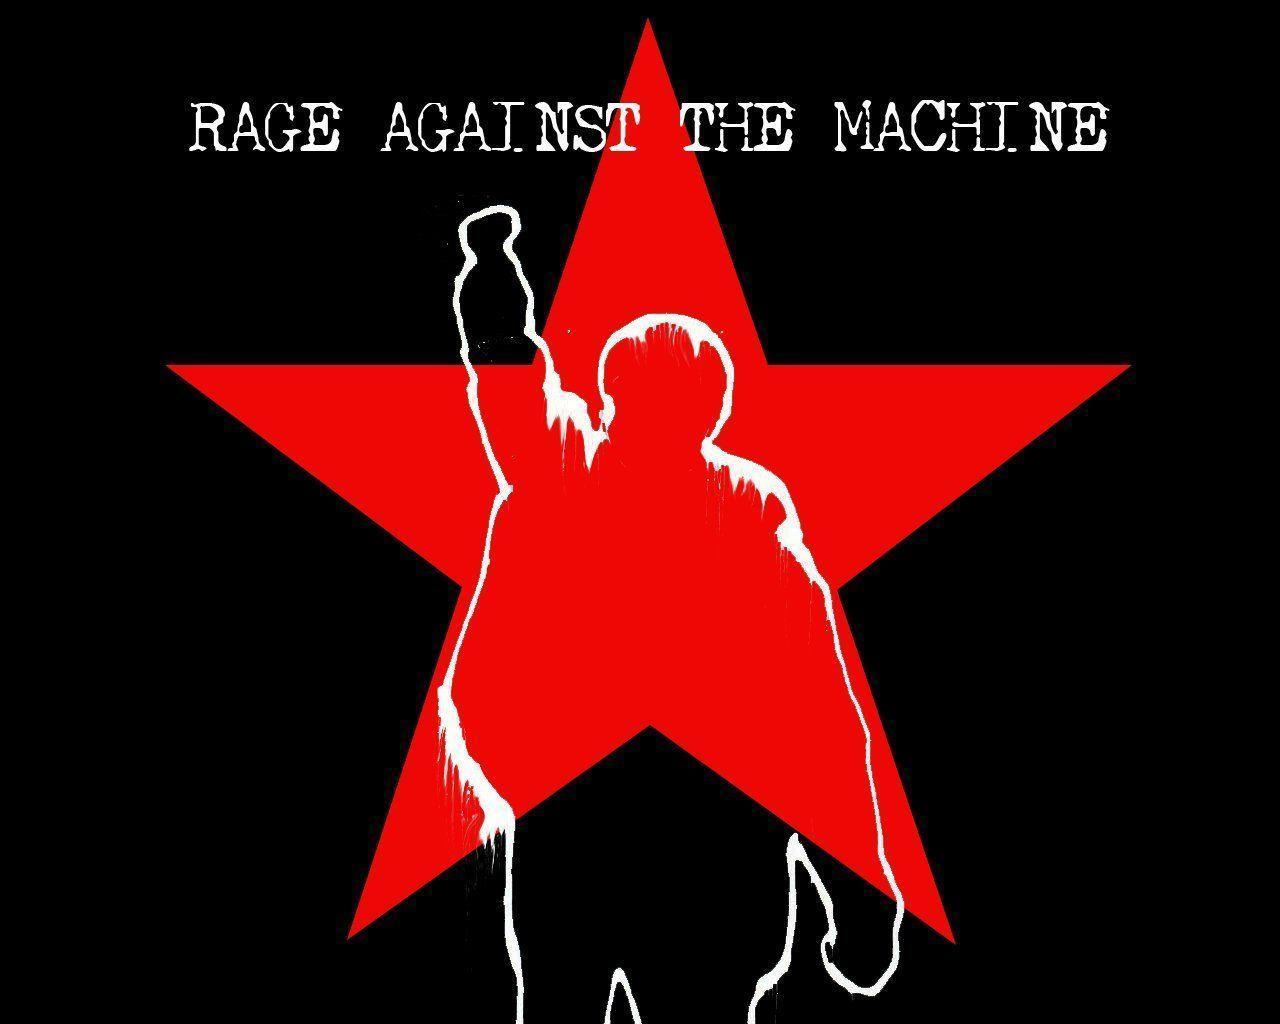 Is Rage Against the Machine planning an anti